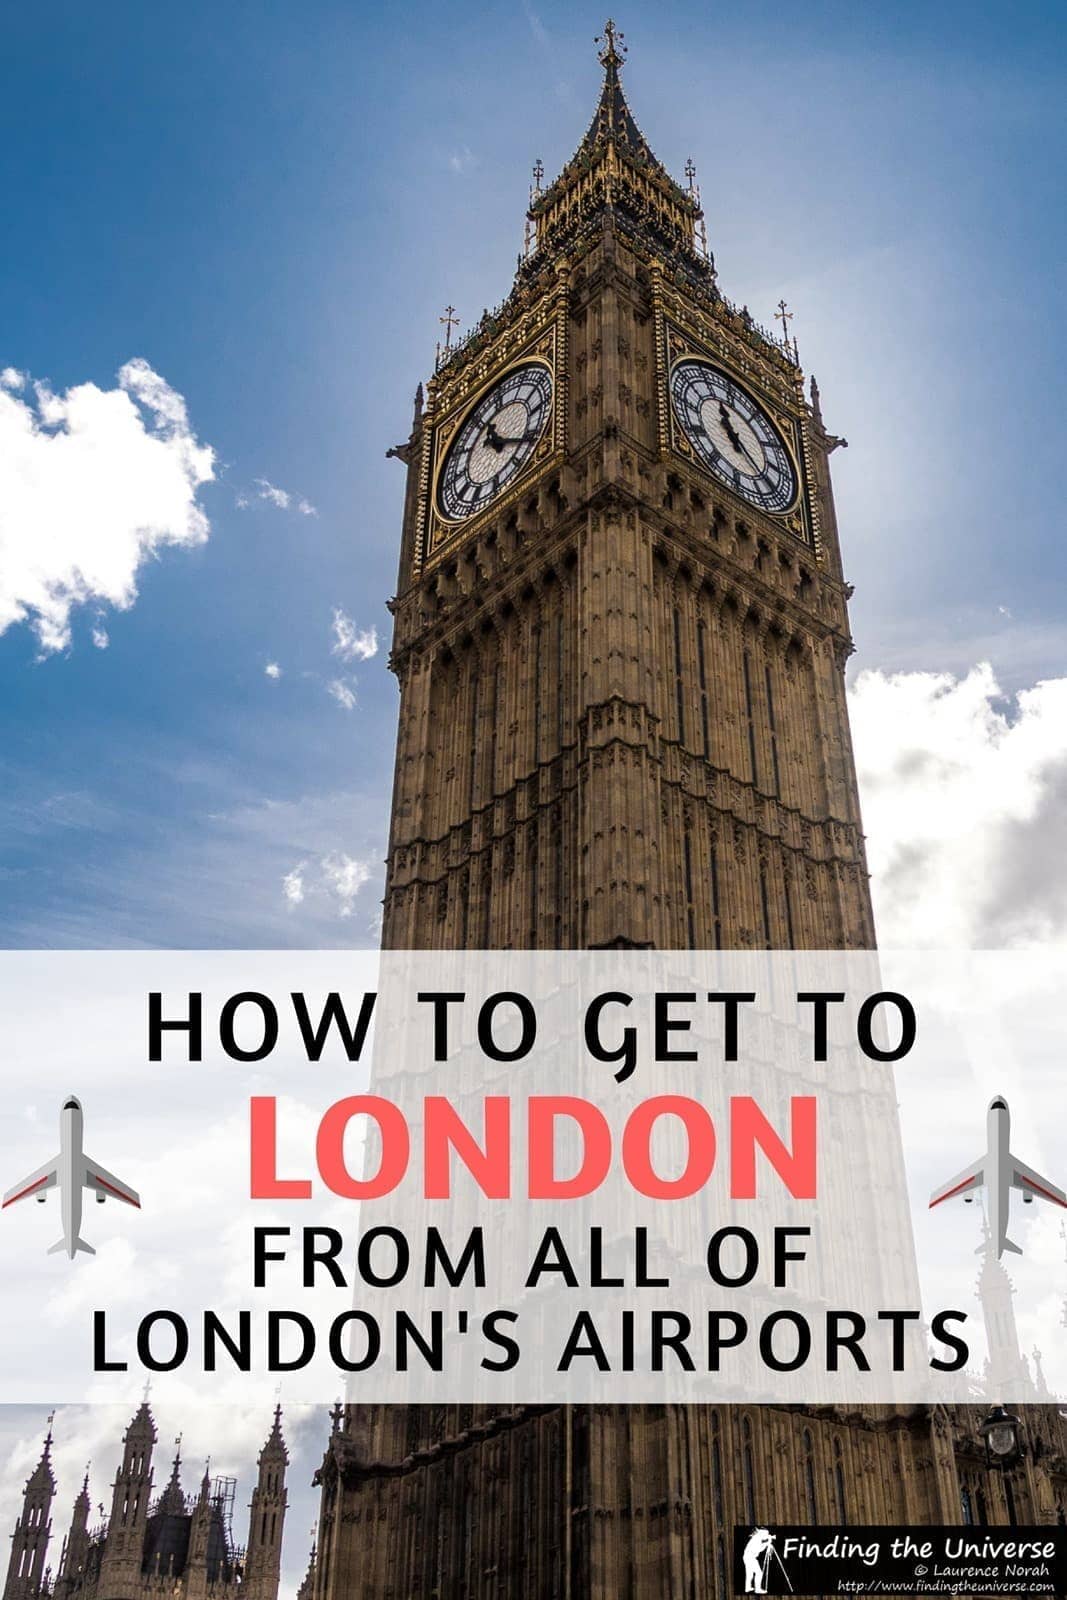 How to get to central London from the airport, with advice for getting to London from Heathrow Airport, Gatwick Airport, Stansted Airport, Luton Airport, London City Airport and Southend Airport.